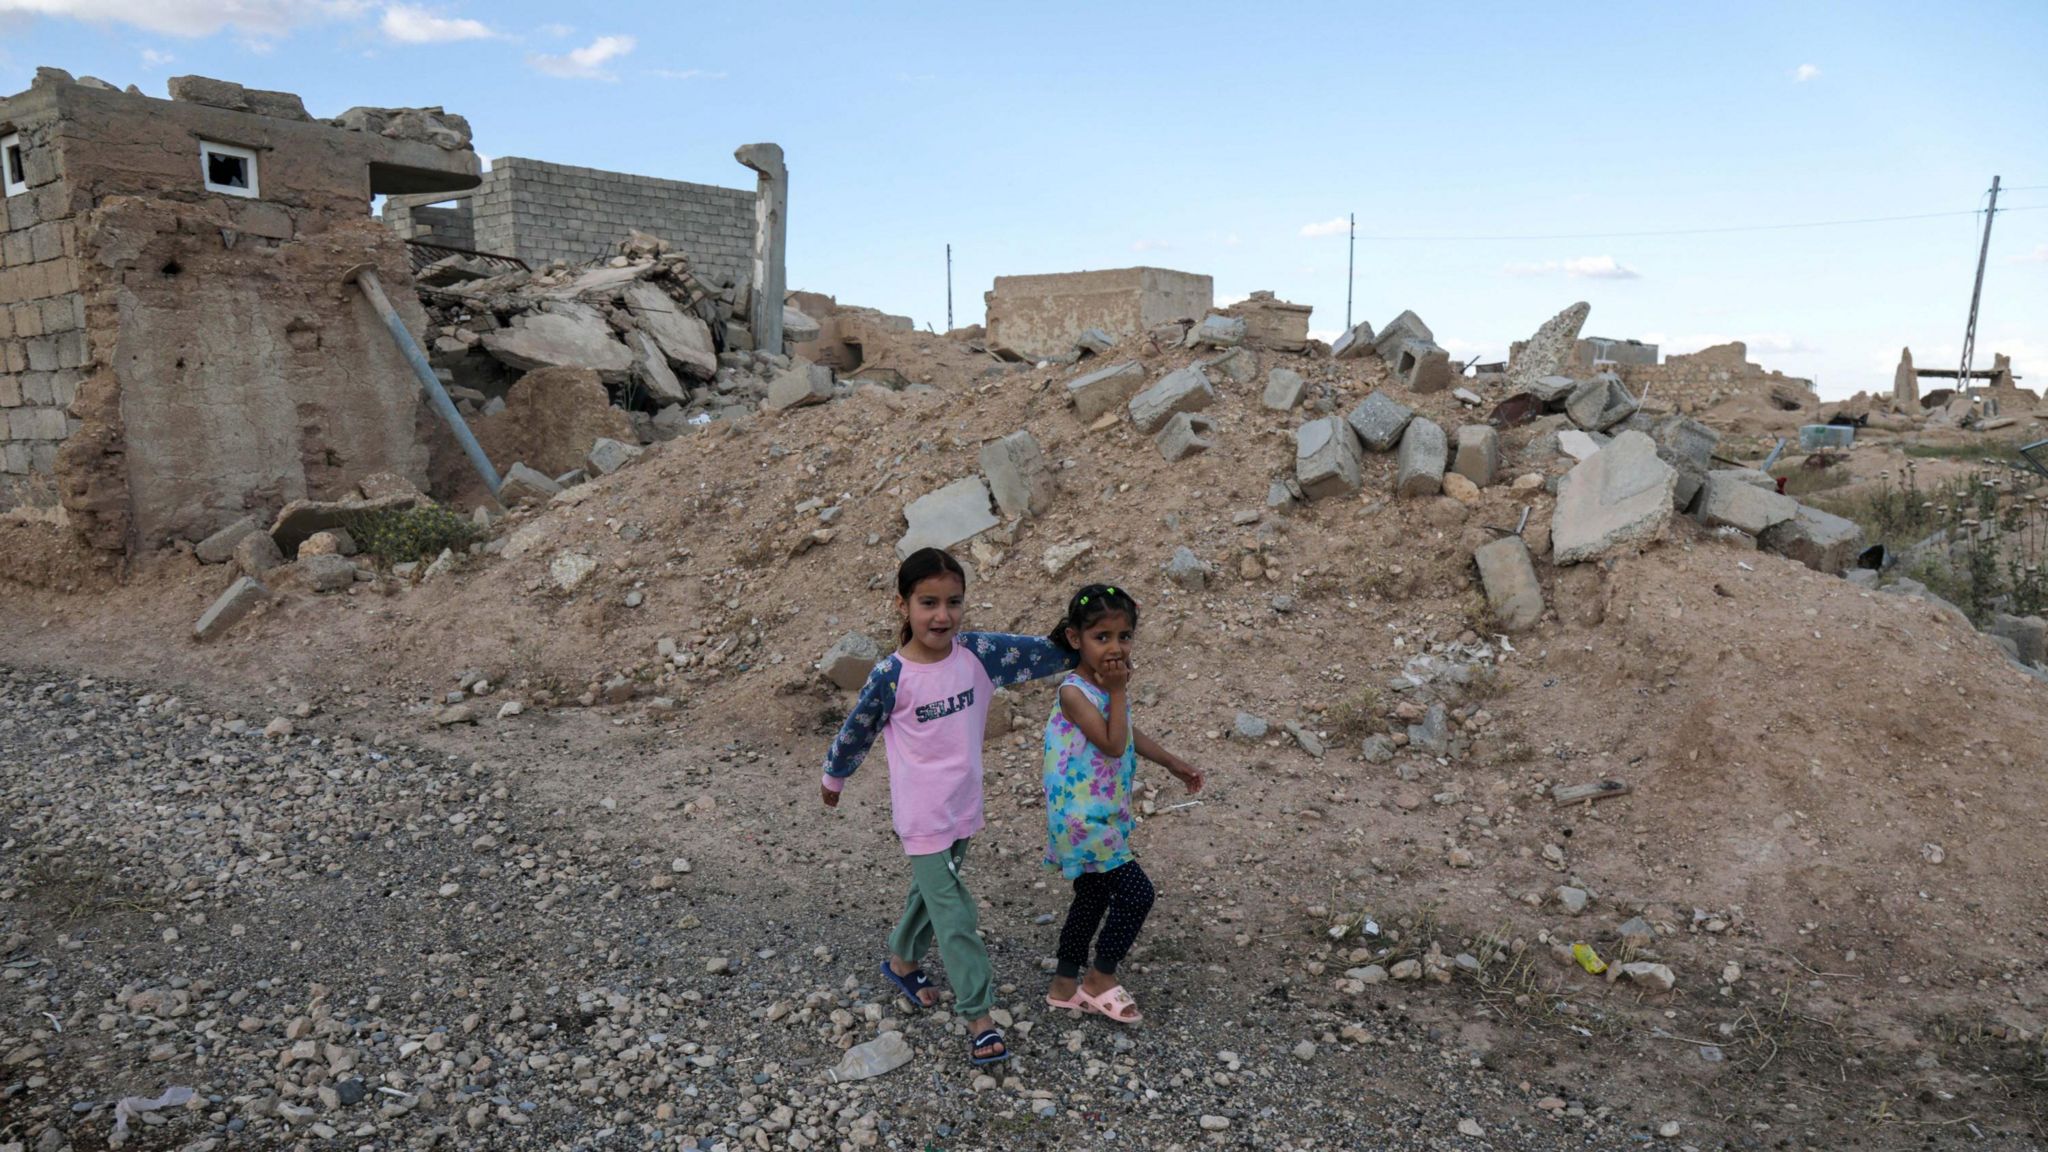 Two children walk among the rubble of Sinjar